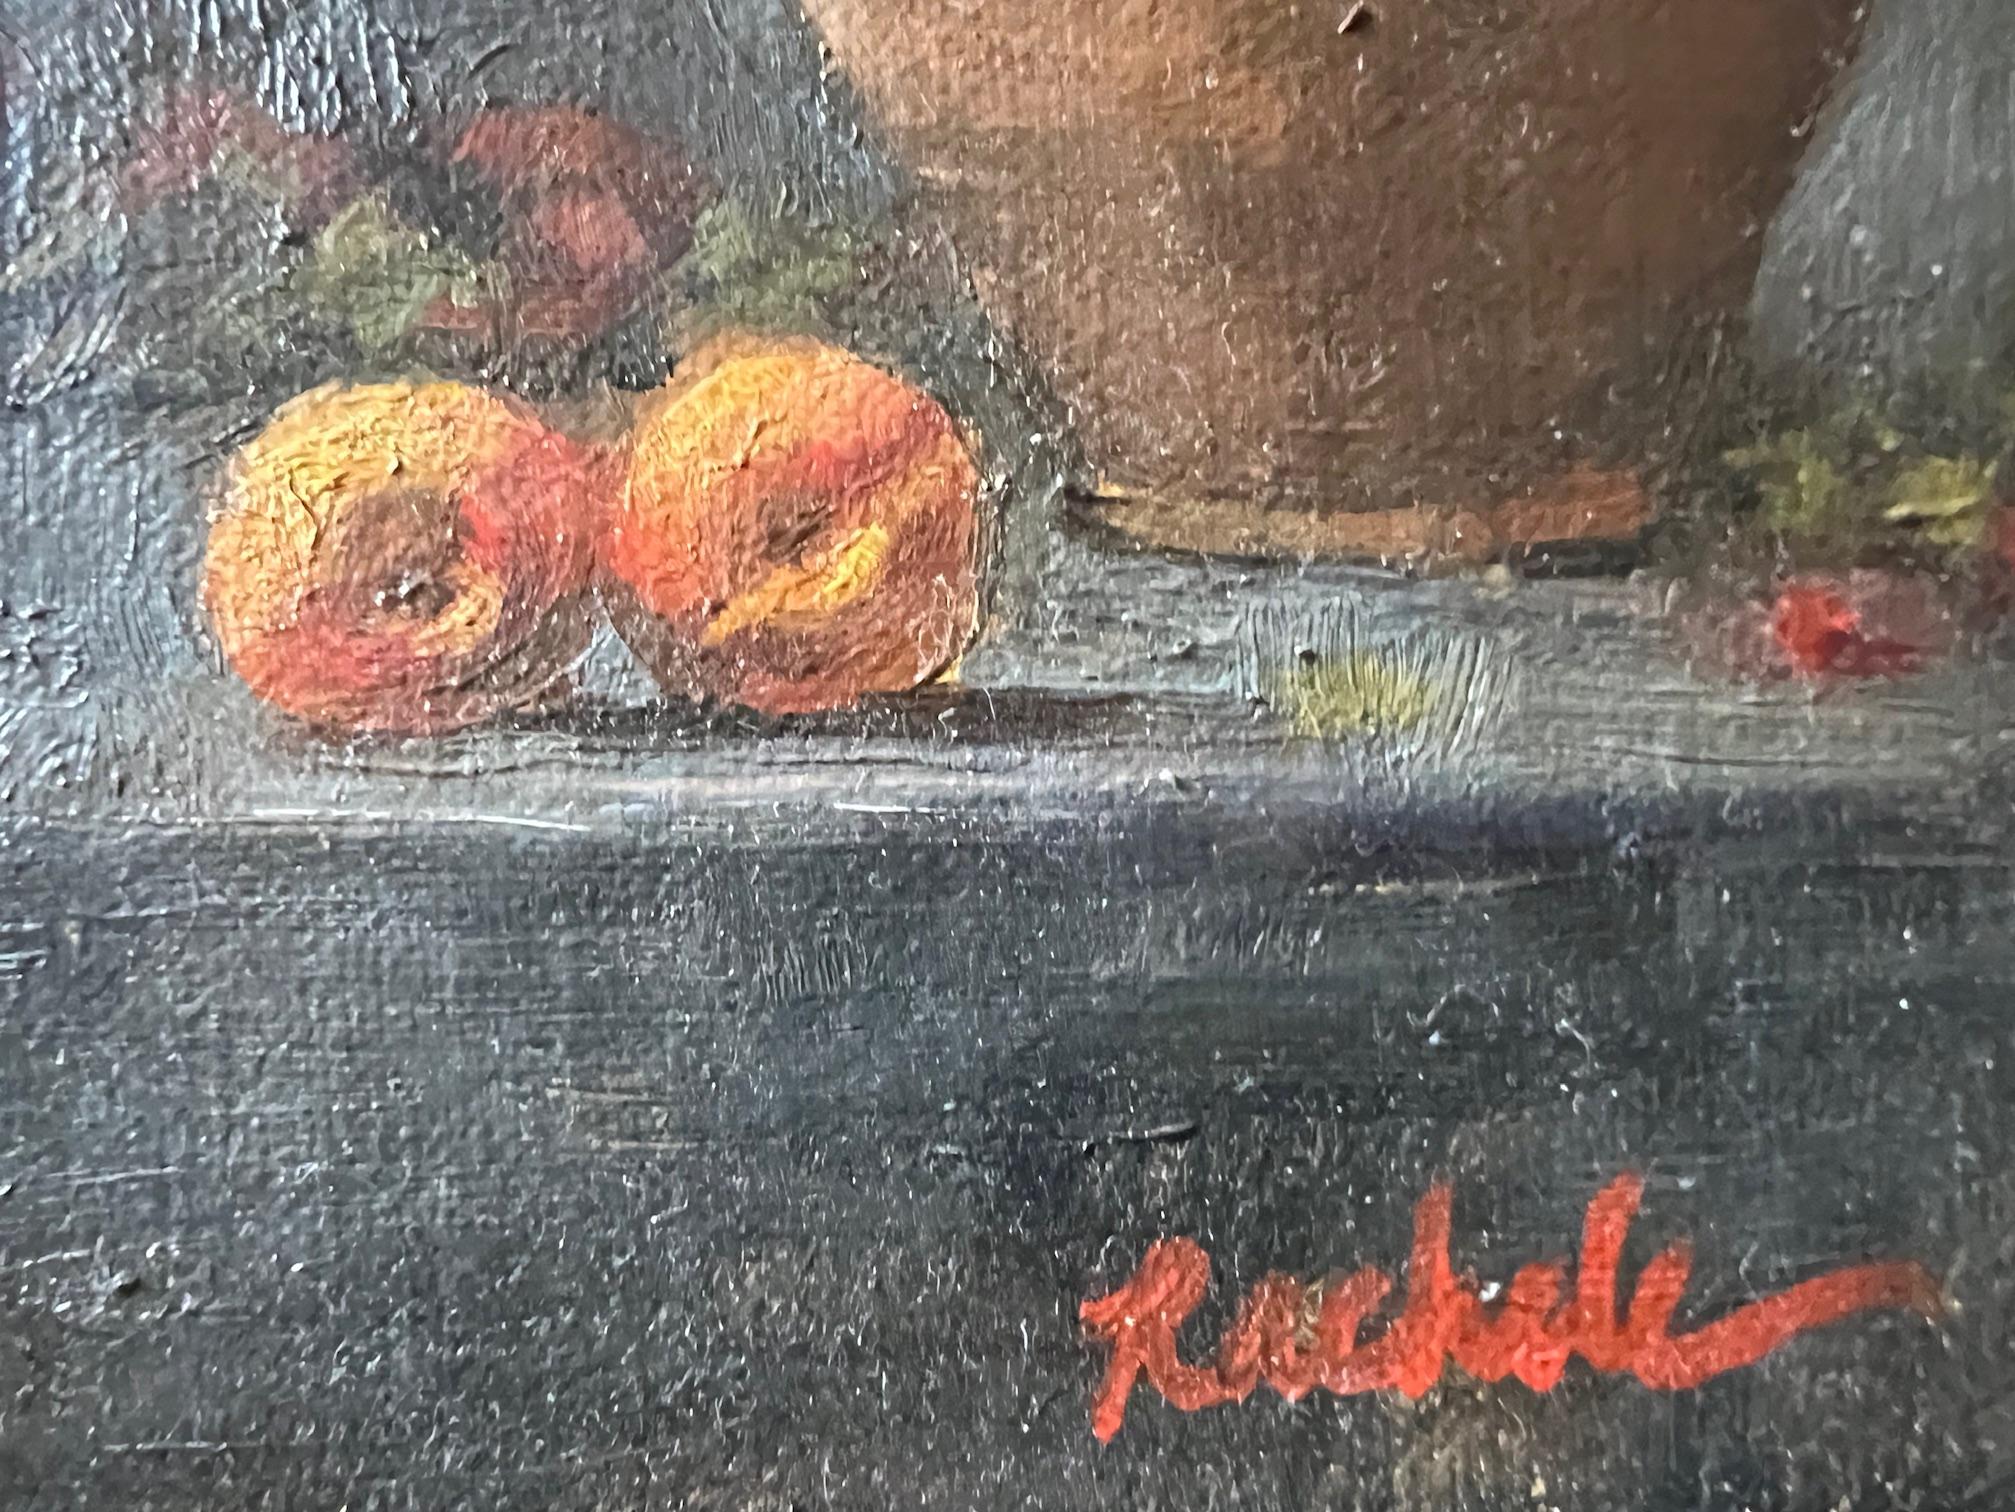 American Classical Framed Still Life Oil Painting by Rachele Nyssen, 21st Century For Sale